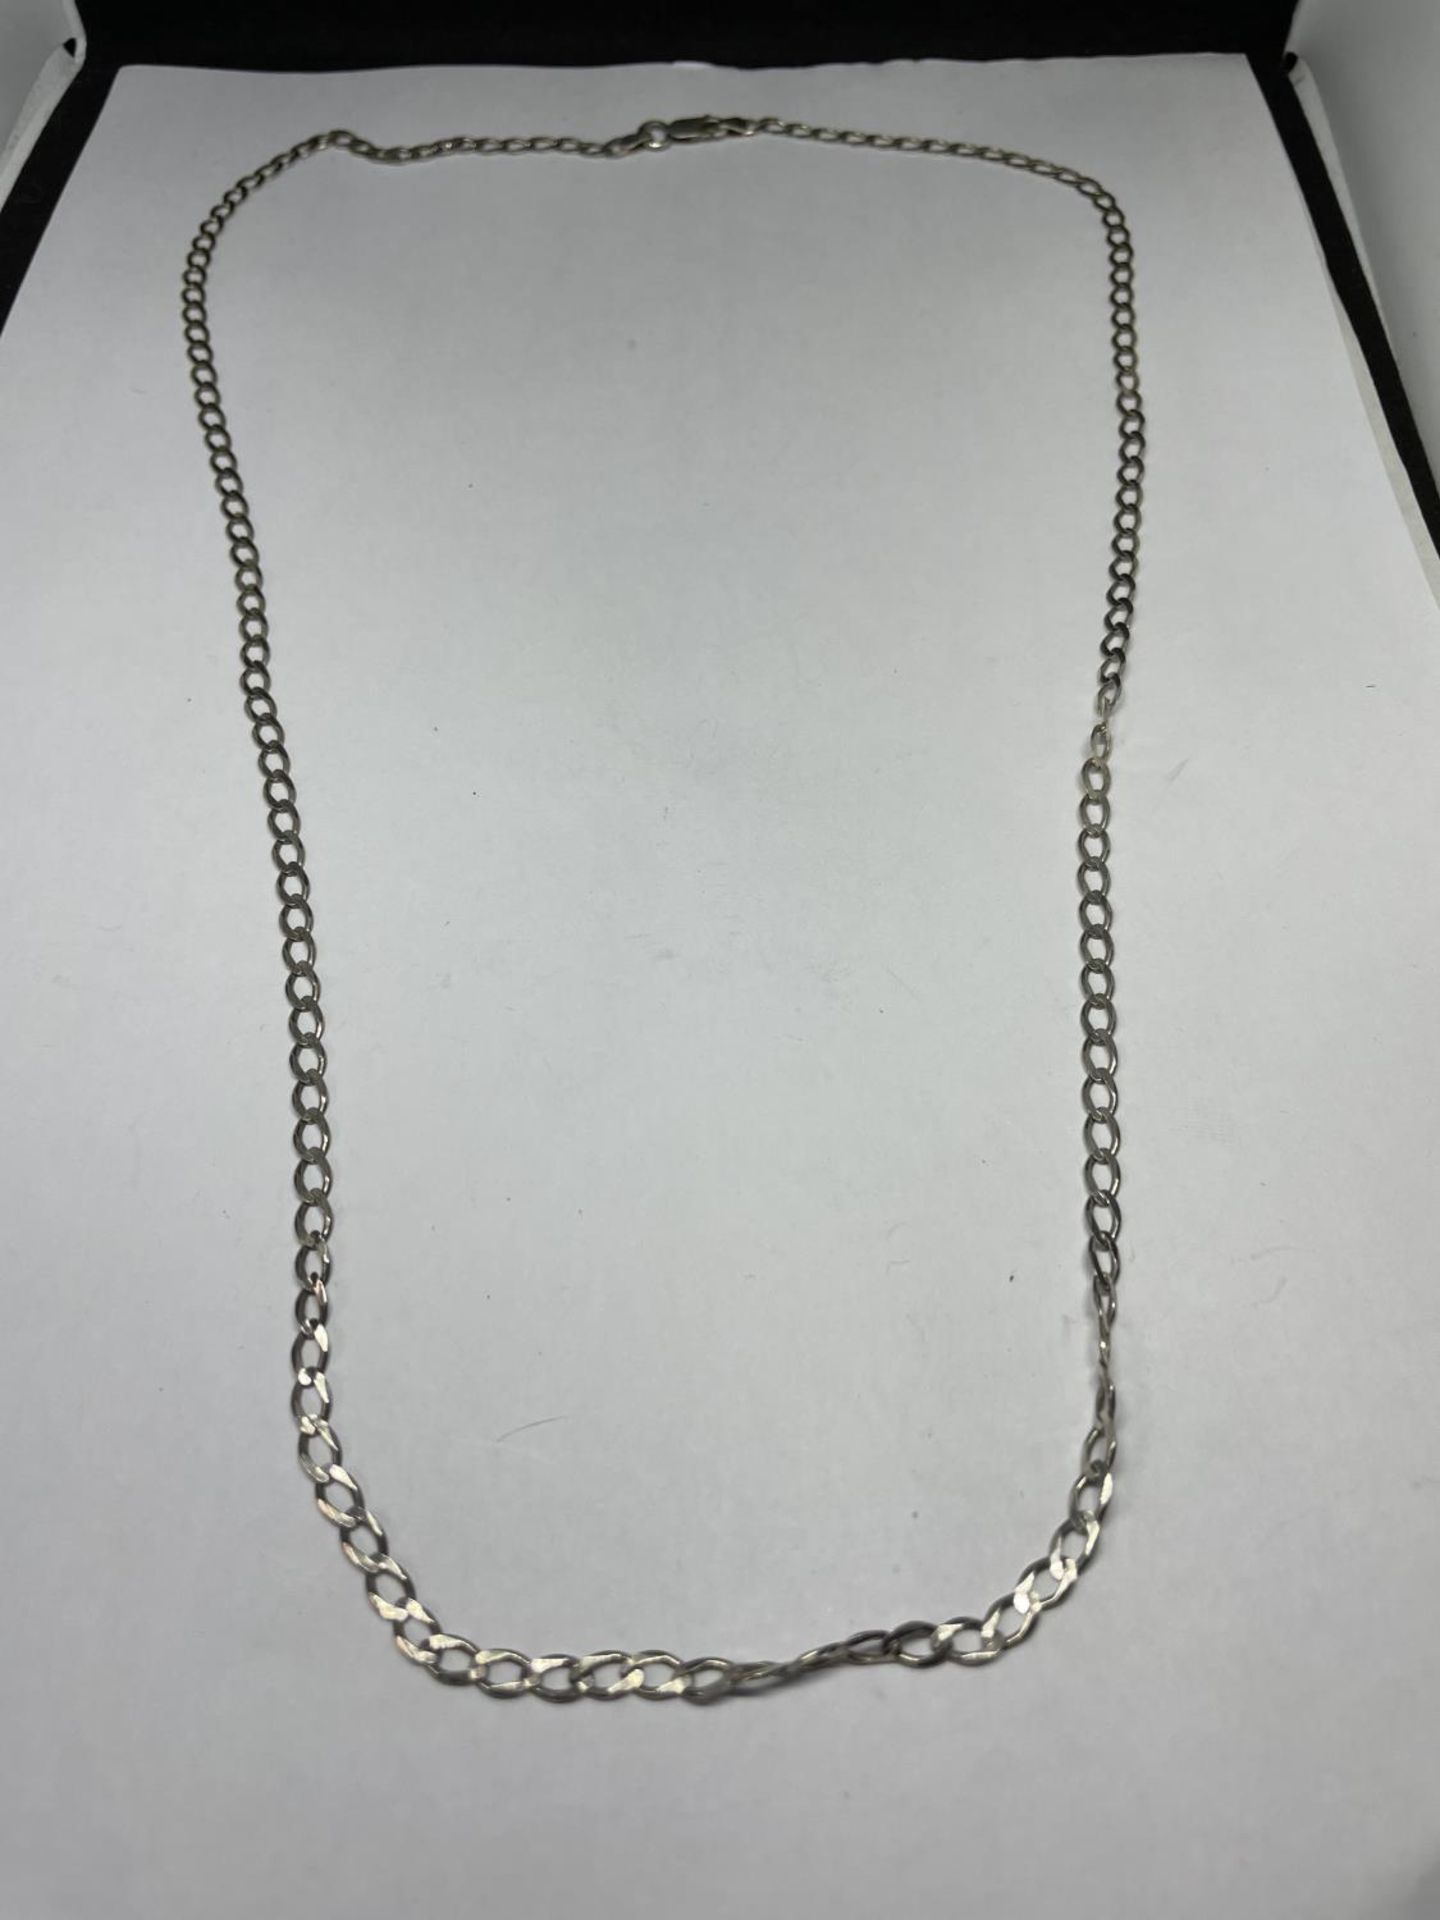 A MARKED SILVER NECKLACE LENGTH 28 INCHES